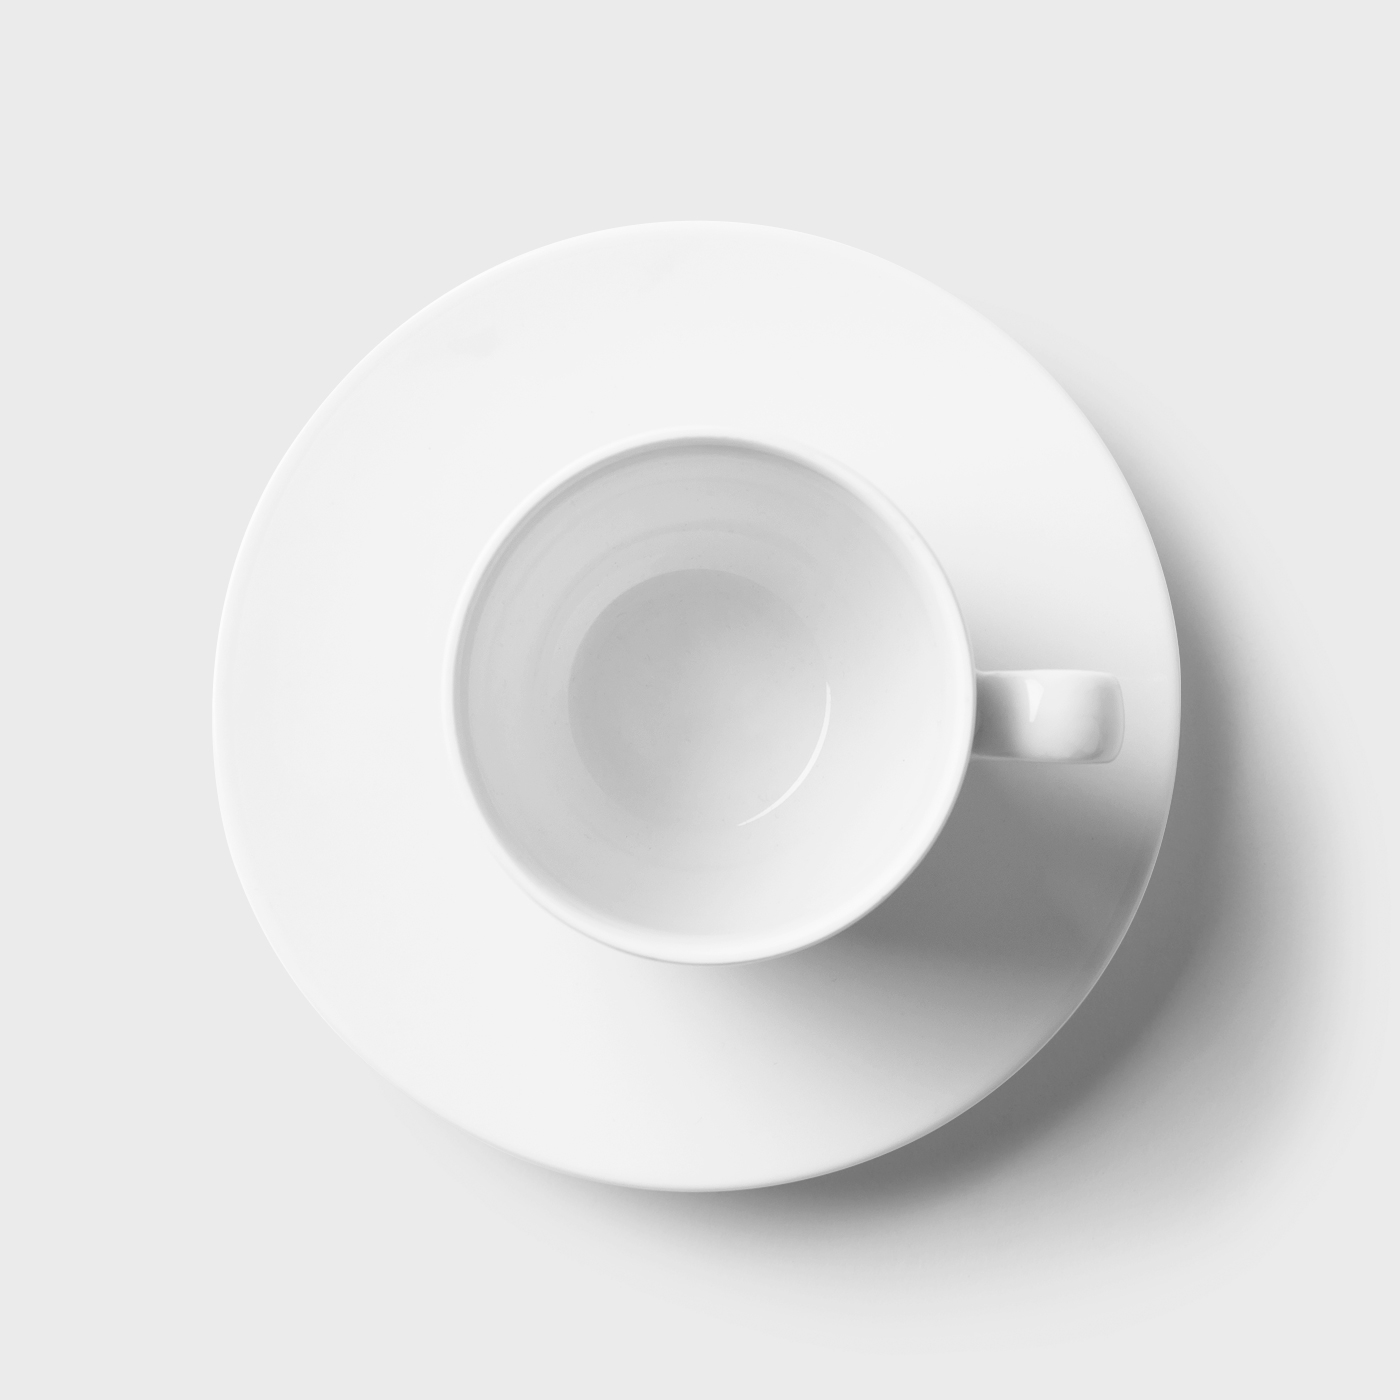 Top View of Saucer with Cup Mockup FREE PSD